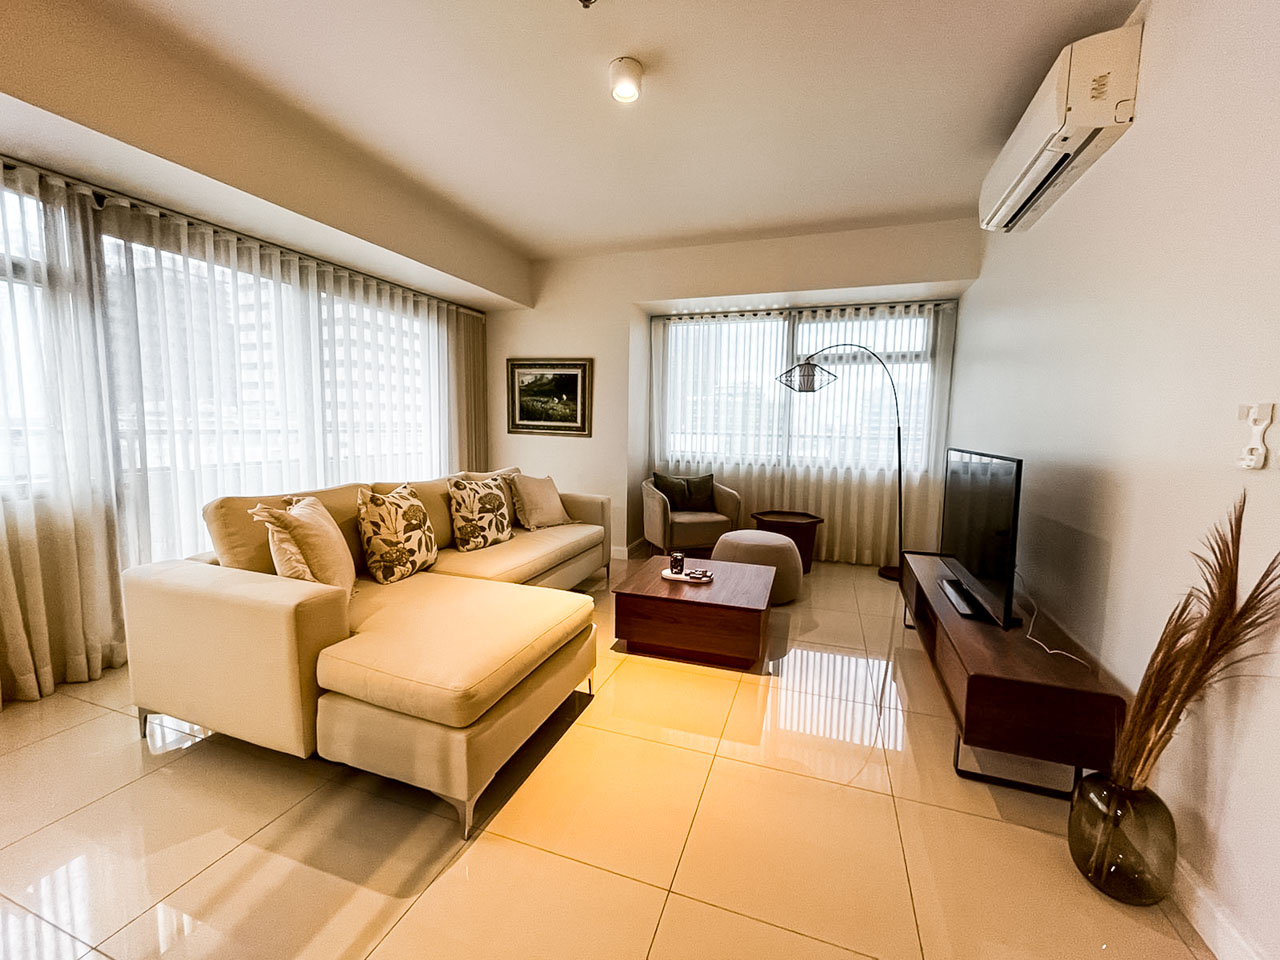 RCALC9 Furnished 2 Bedroom Condo for Rent in Cebu Business Park - 5